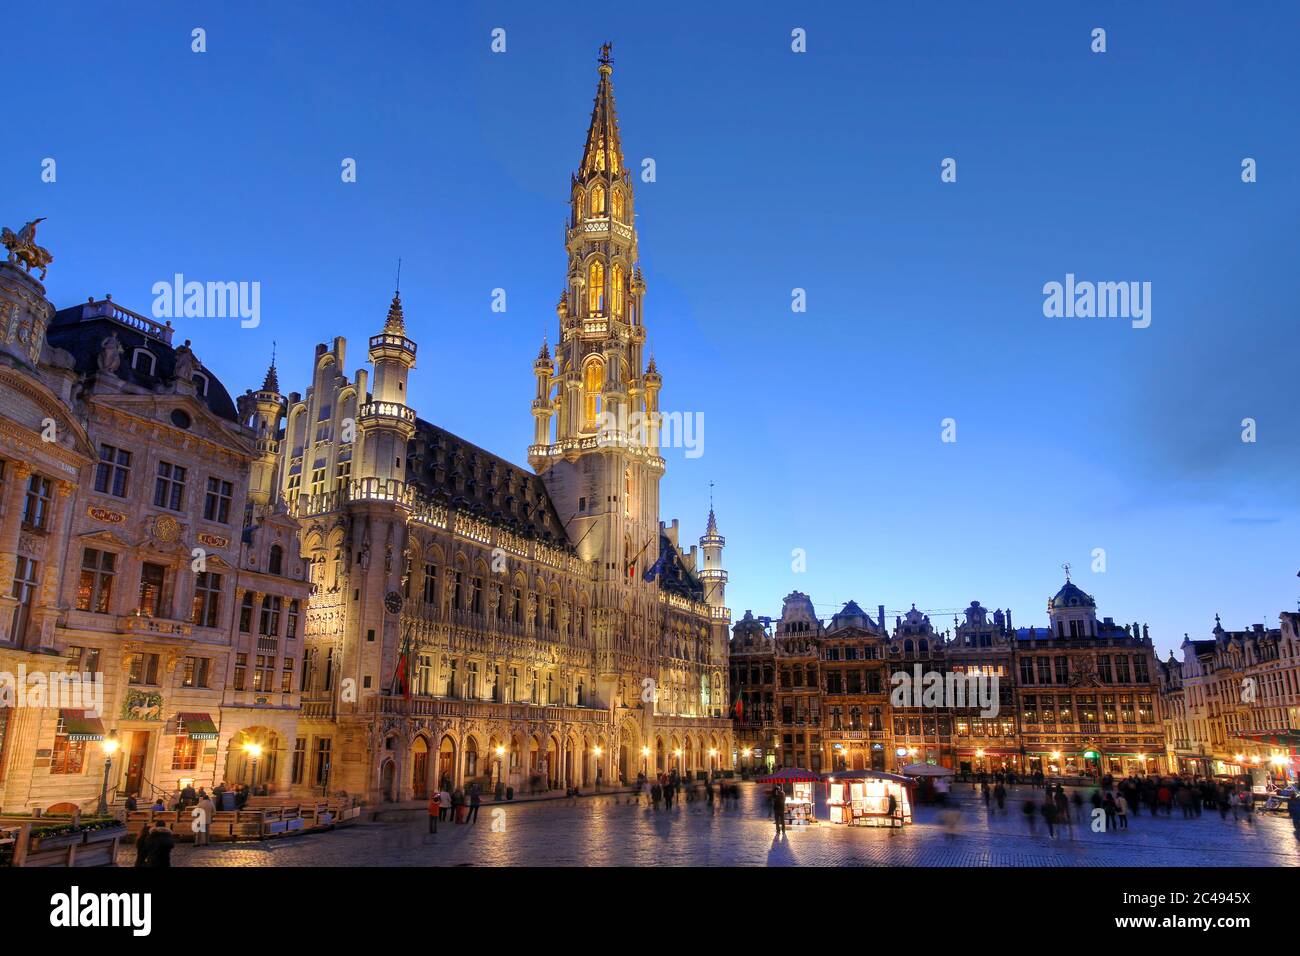 Wide angle night scene of the Grand Plance, the focal point of Brussels, Belgium. The townhall (Hotel de Ville) is dominating the composition with its Stock Photo